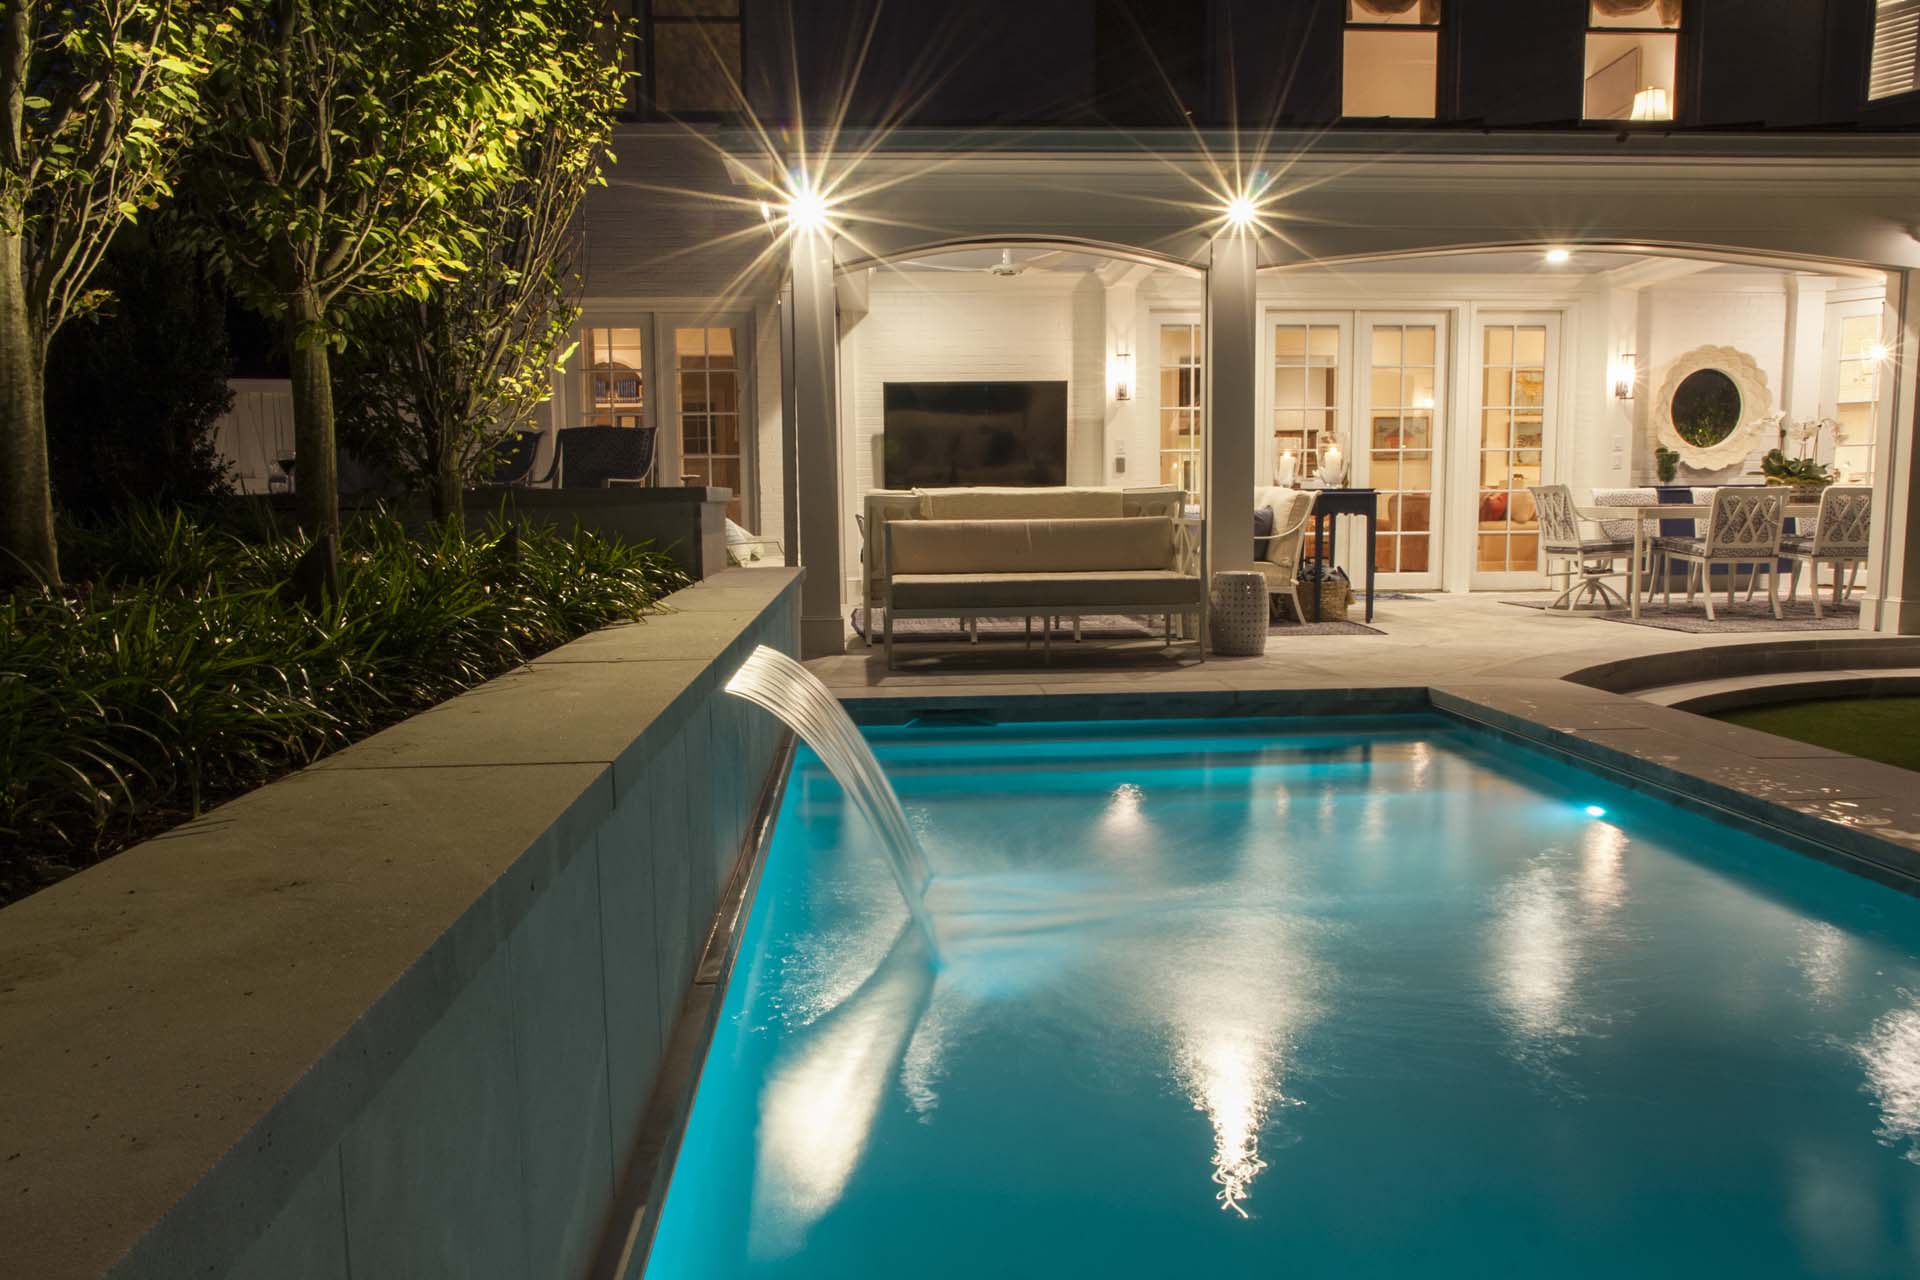 A house with a pool and a fountain, enhanced by landscape lighting, creating a captivating visual ambiance.